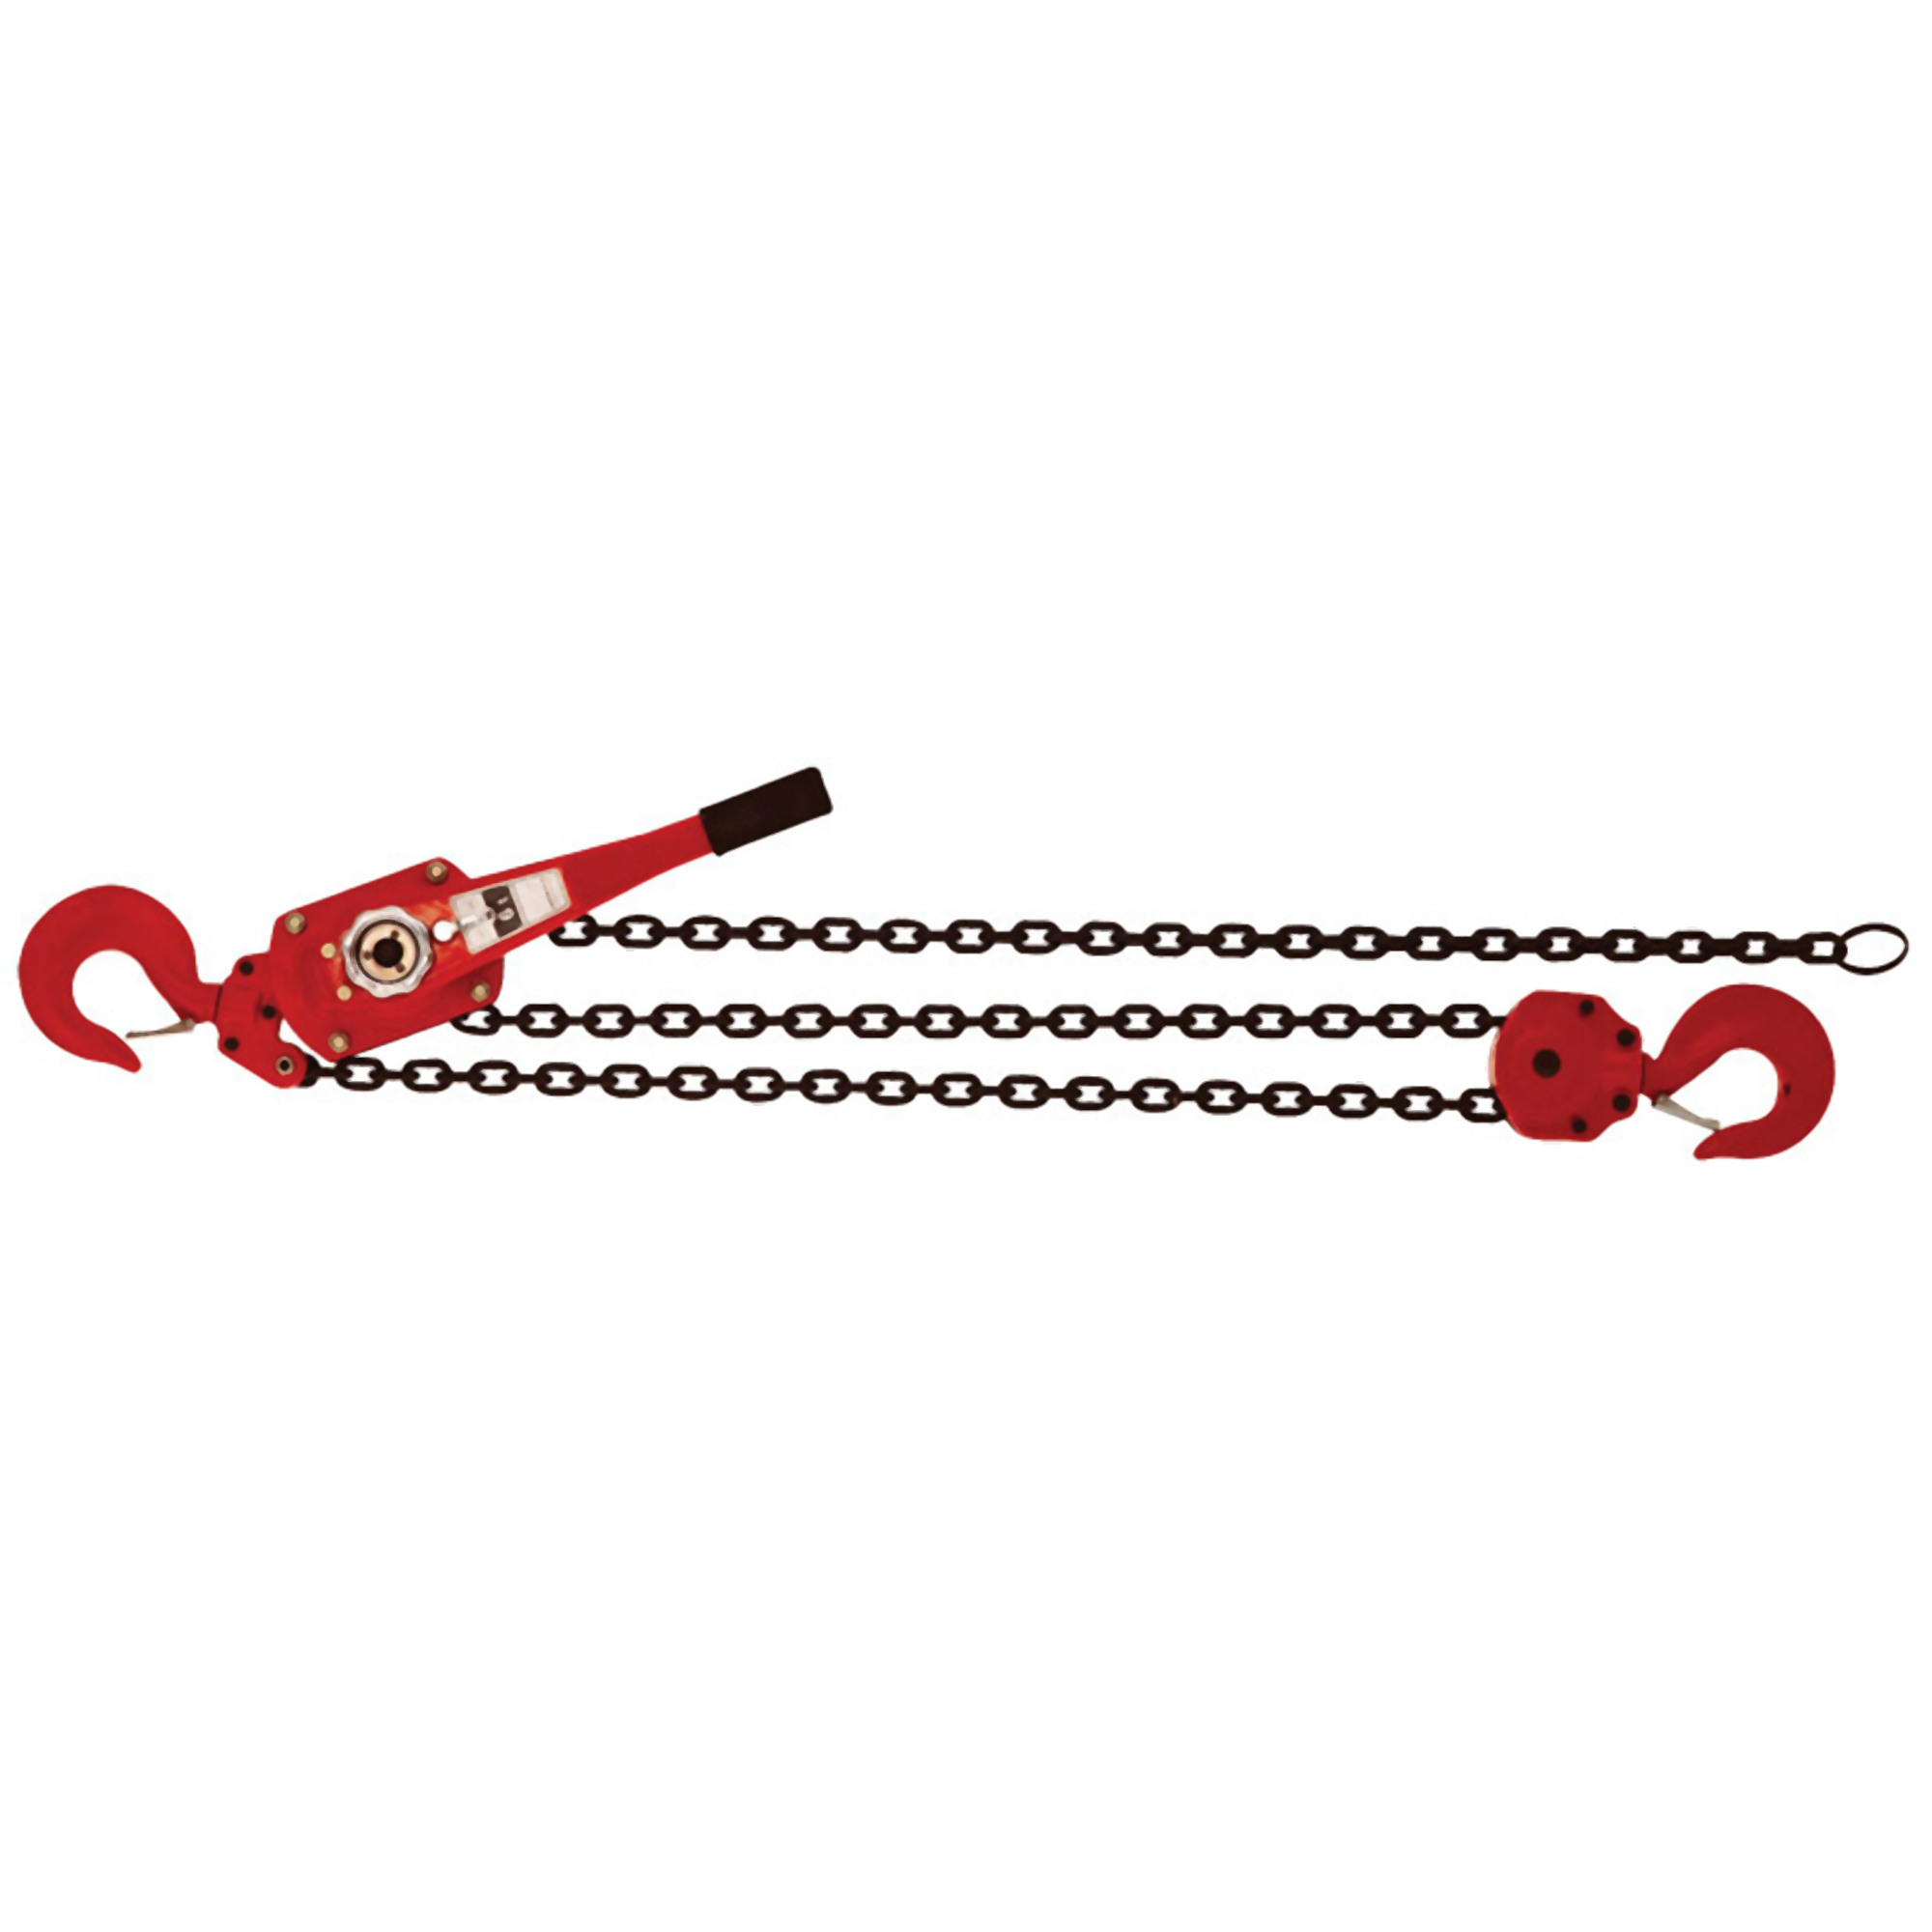 American Power Pull, 6 ton chain puller w/ 10ft. lift, Power Source Manual Lever, Capacity 12000 lb, Lift Height 10 ft, Model 660-10